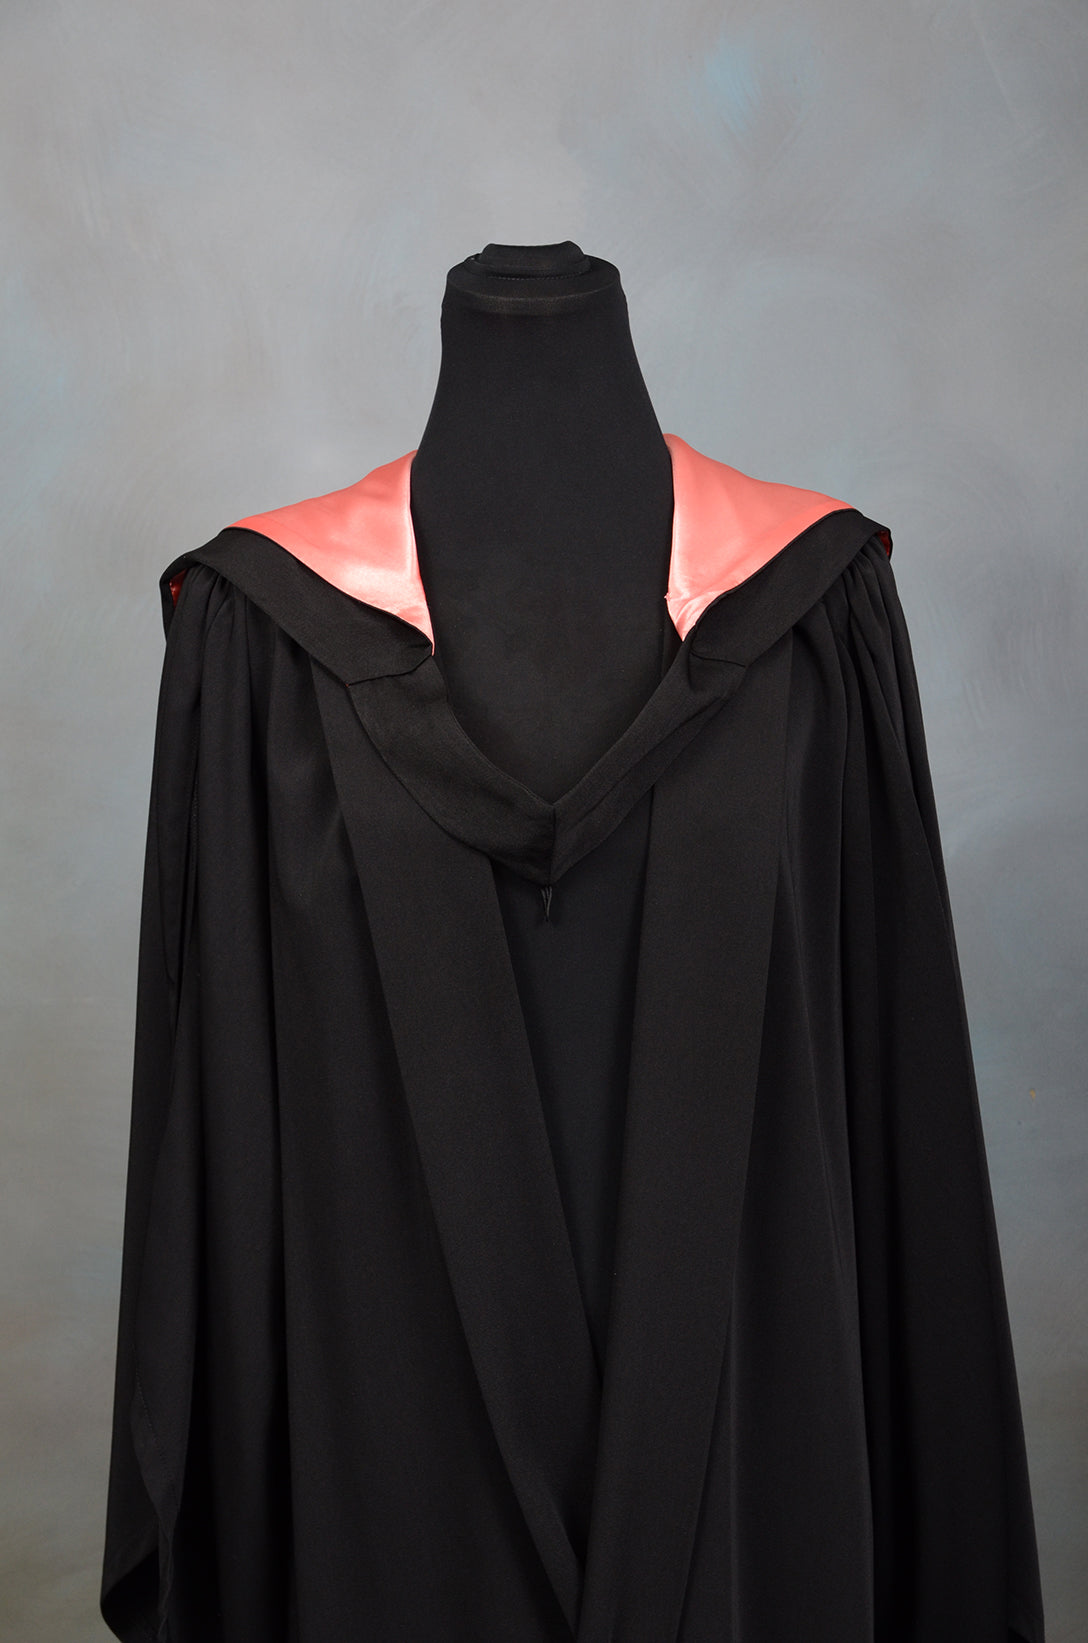 Buy University of Adelaide PhD Graduation Bonnet Online at George H Lilley™️